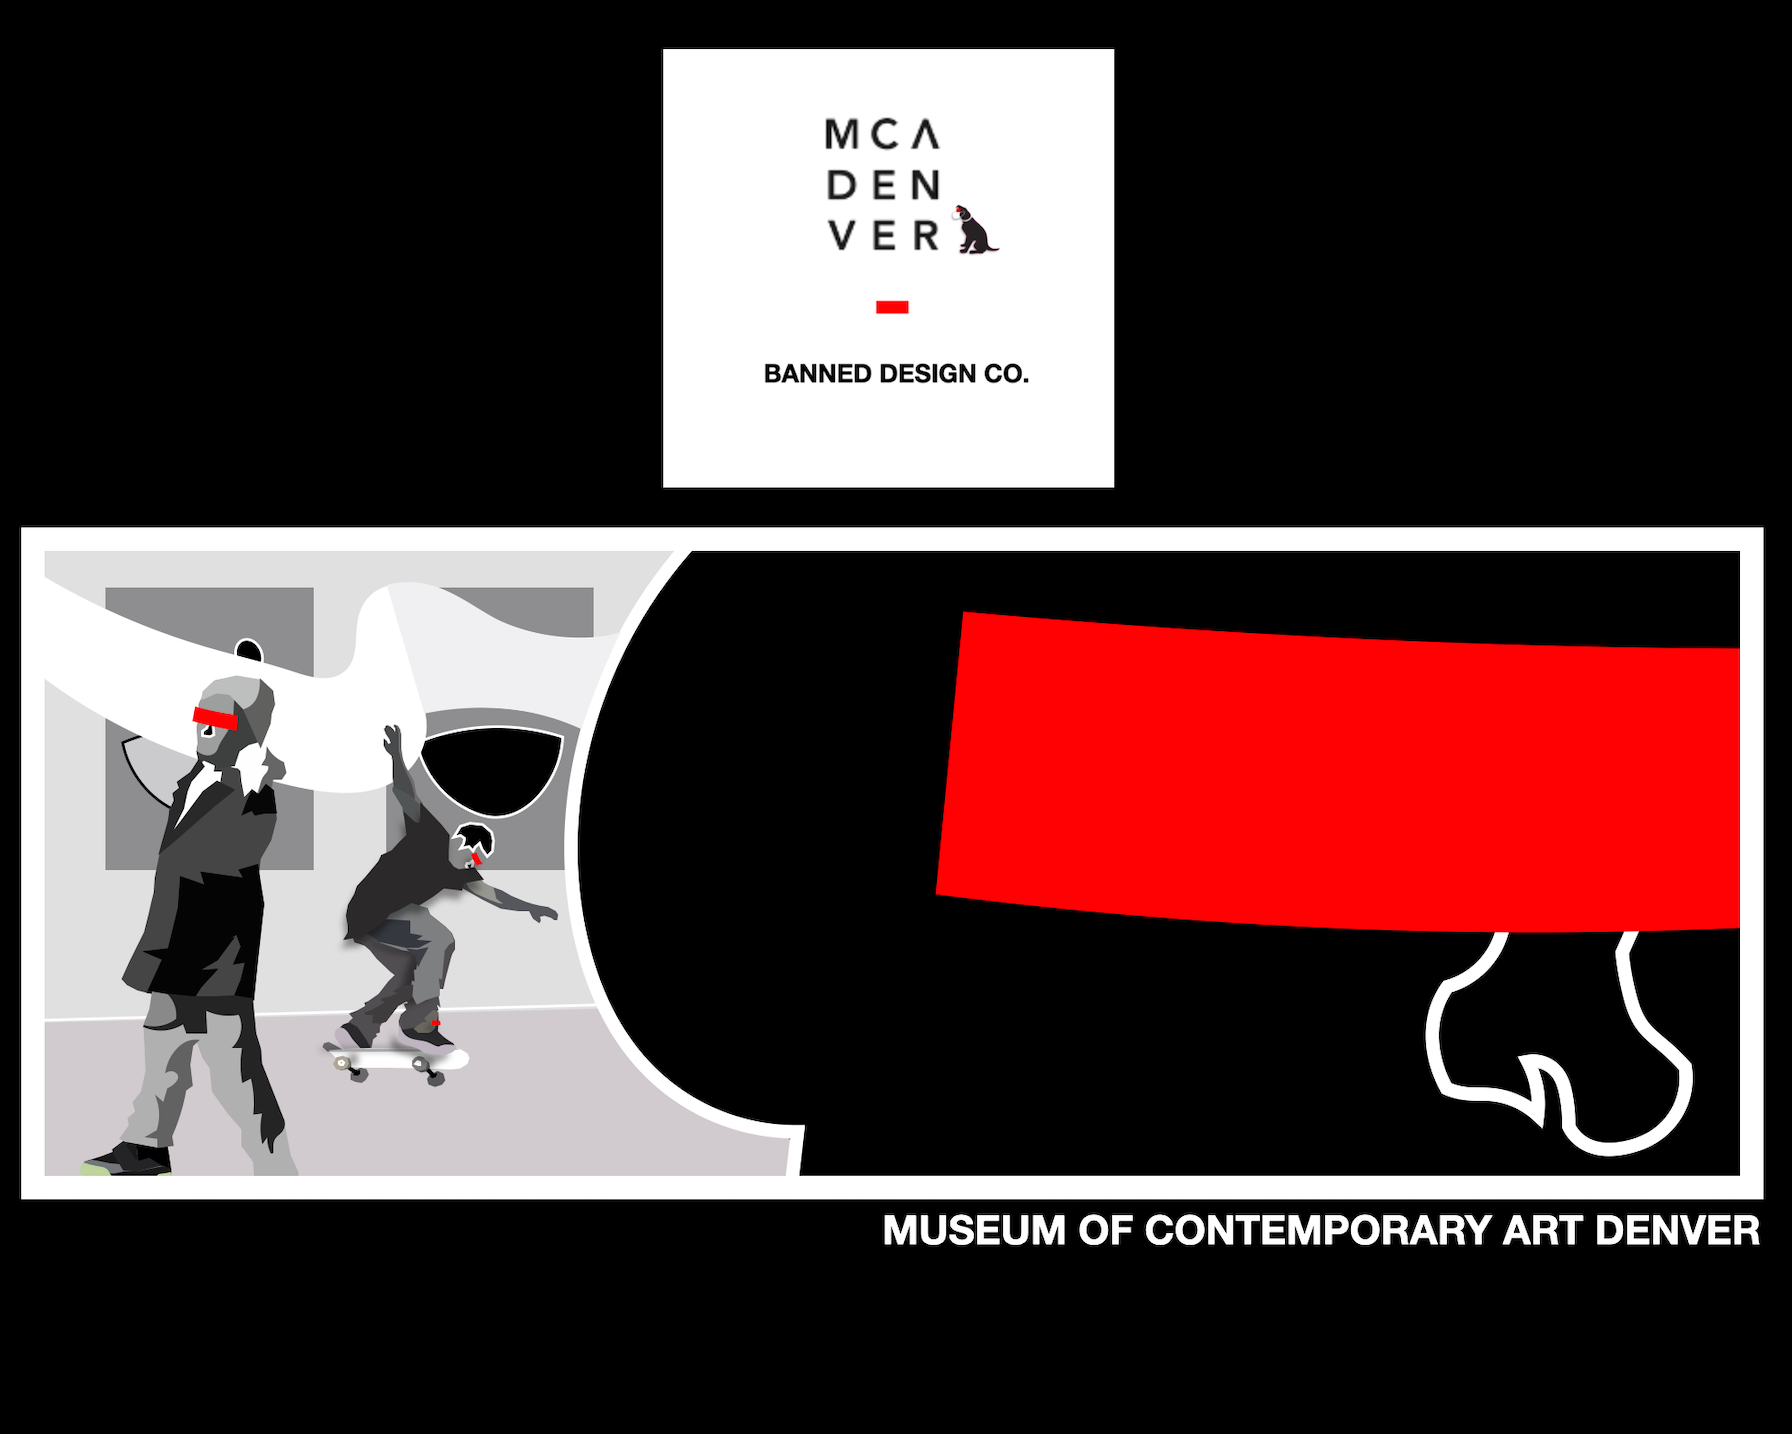 A design with a black background and peculiar, abstract shapes laid on top. On one side of the design is two humanlike figures in what looks like a gallery space. One is skateboarding and the other is merely walking; both of them have red rectangles over their eyes that match the red rectangle on the other side of the design. 